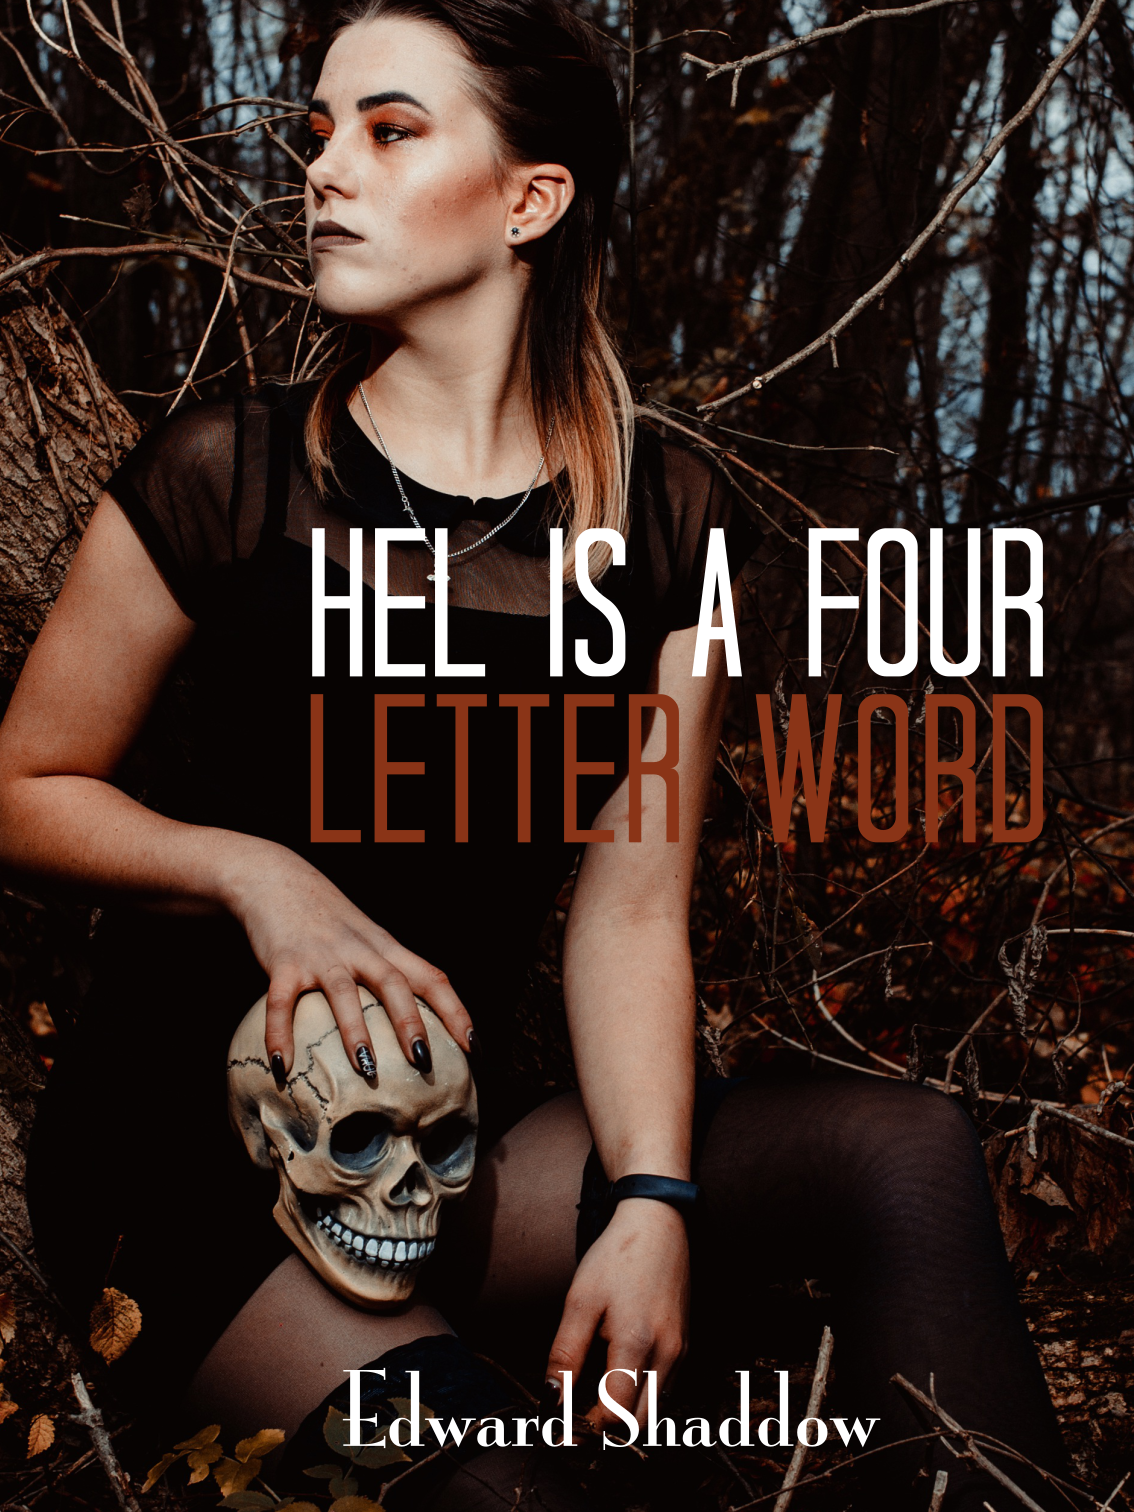 Cover of Hel is a four letter word book with a woman crouched down in a forrest holding a human skull